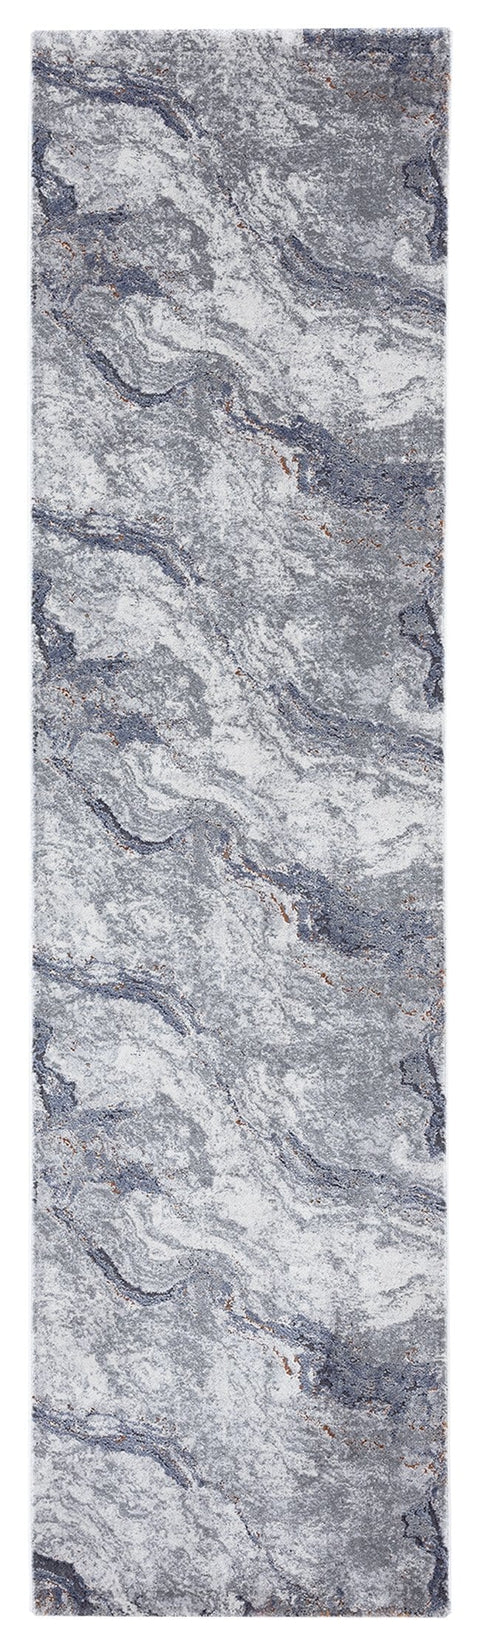 Nami Blue Stone and Bronze Marble Transitional Motif Runner Rug